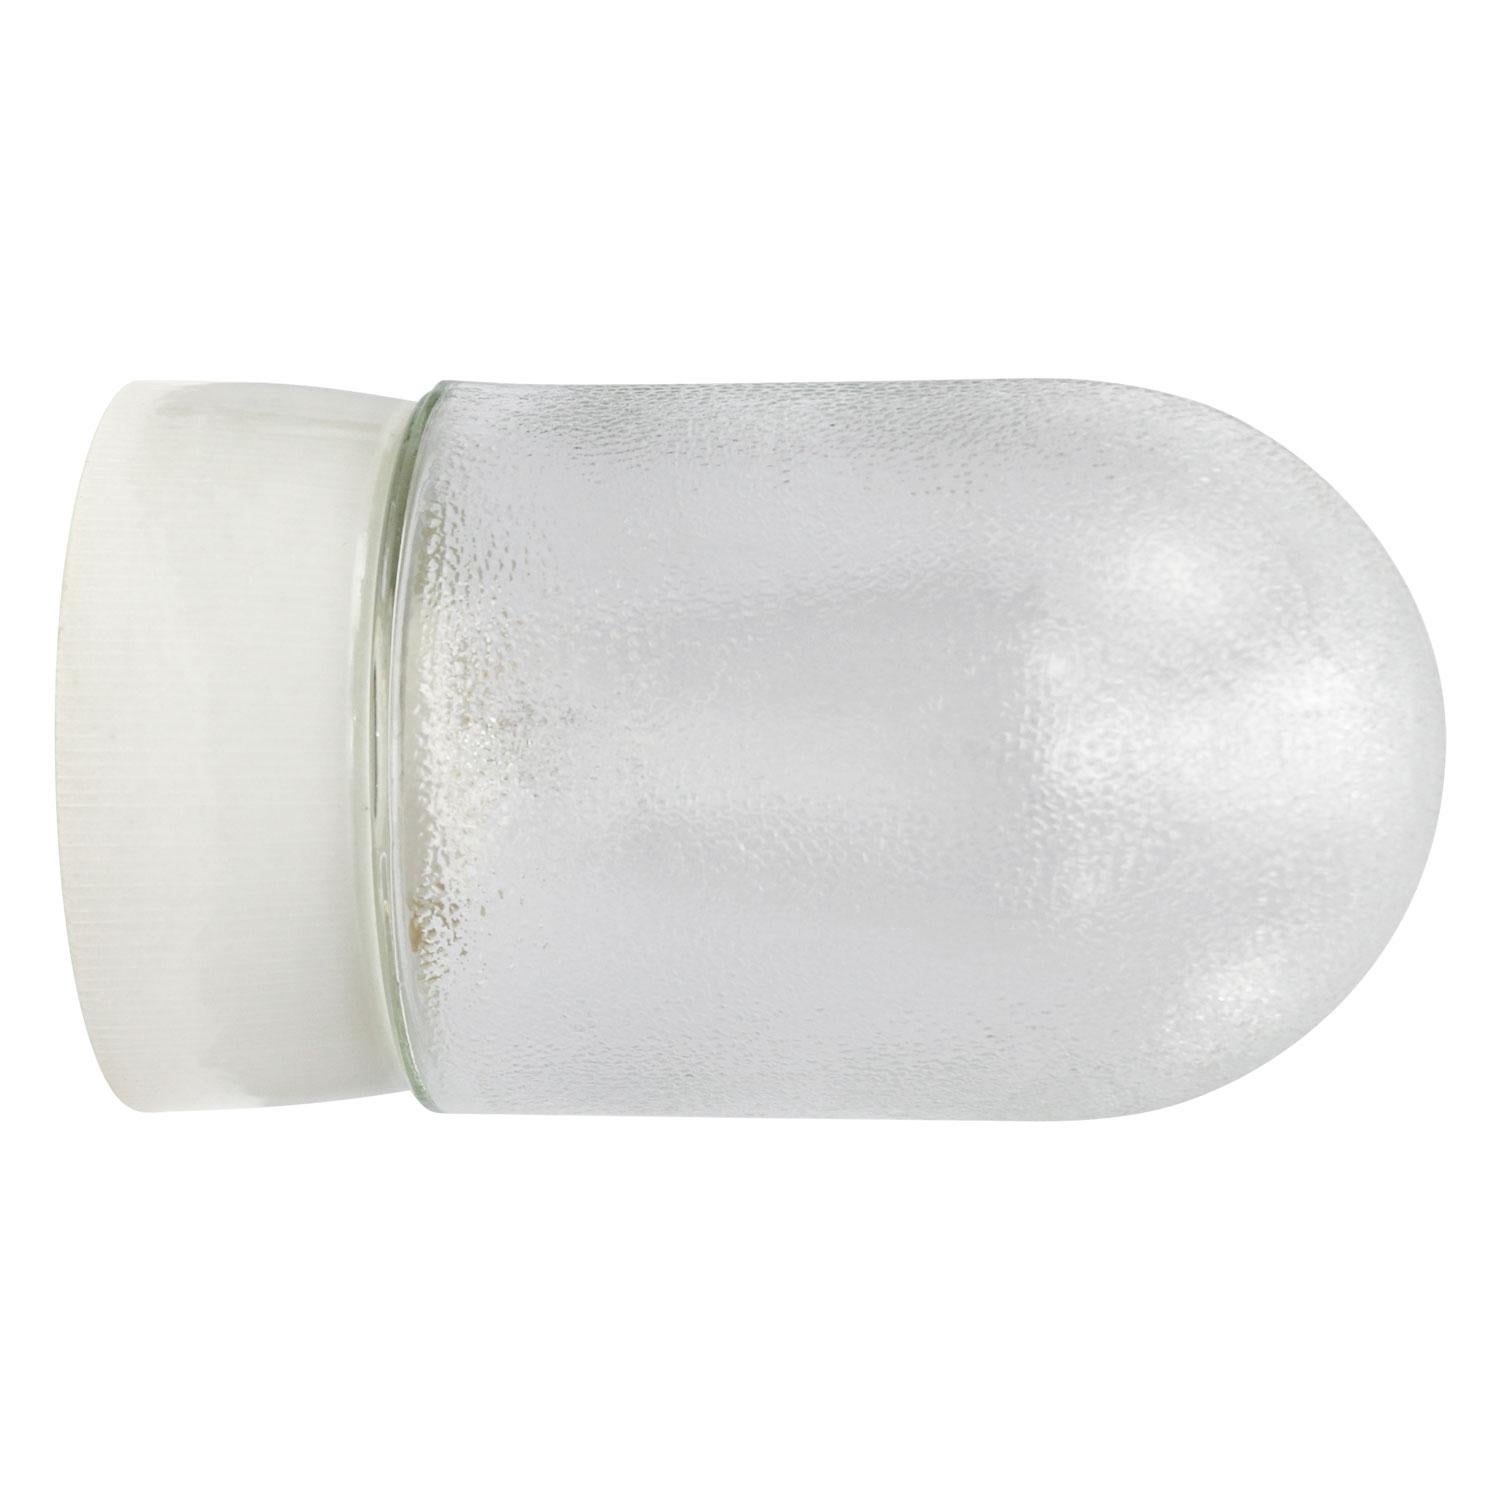 Industrial ceiling lamp.
White porcelain, frosted glass.

2 conductors, no ground.
Suitable for 110 volt USA
new wiring is CE certified (220 volt)  or UL Listed (110 volt) 

Weight: 1.00 kg / 2.2 lb

Priced per individual item. All lamps have been